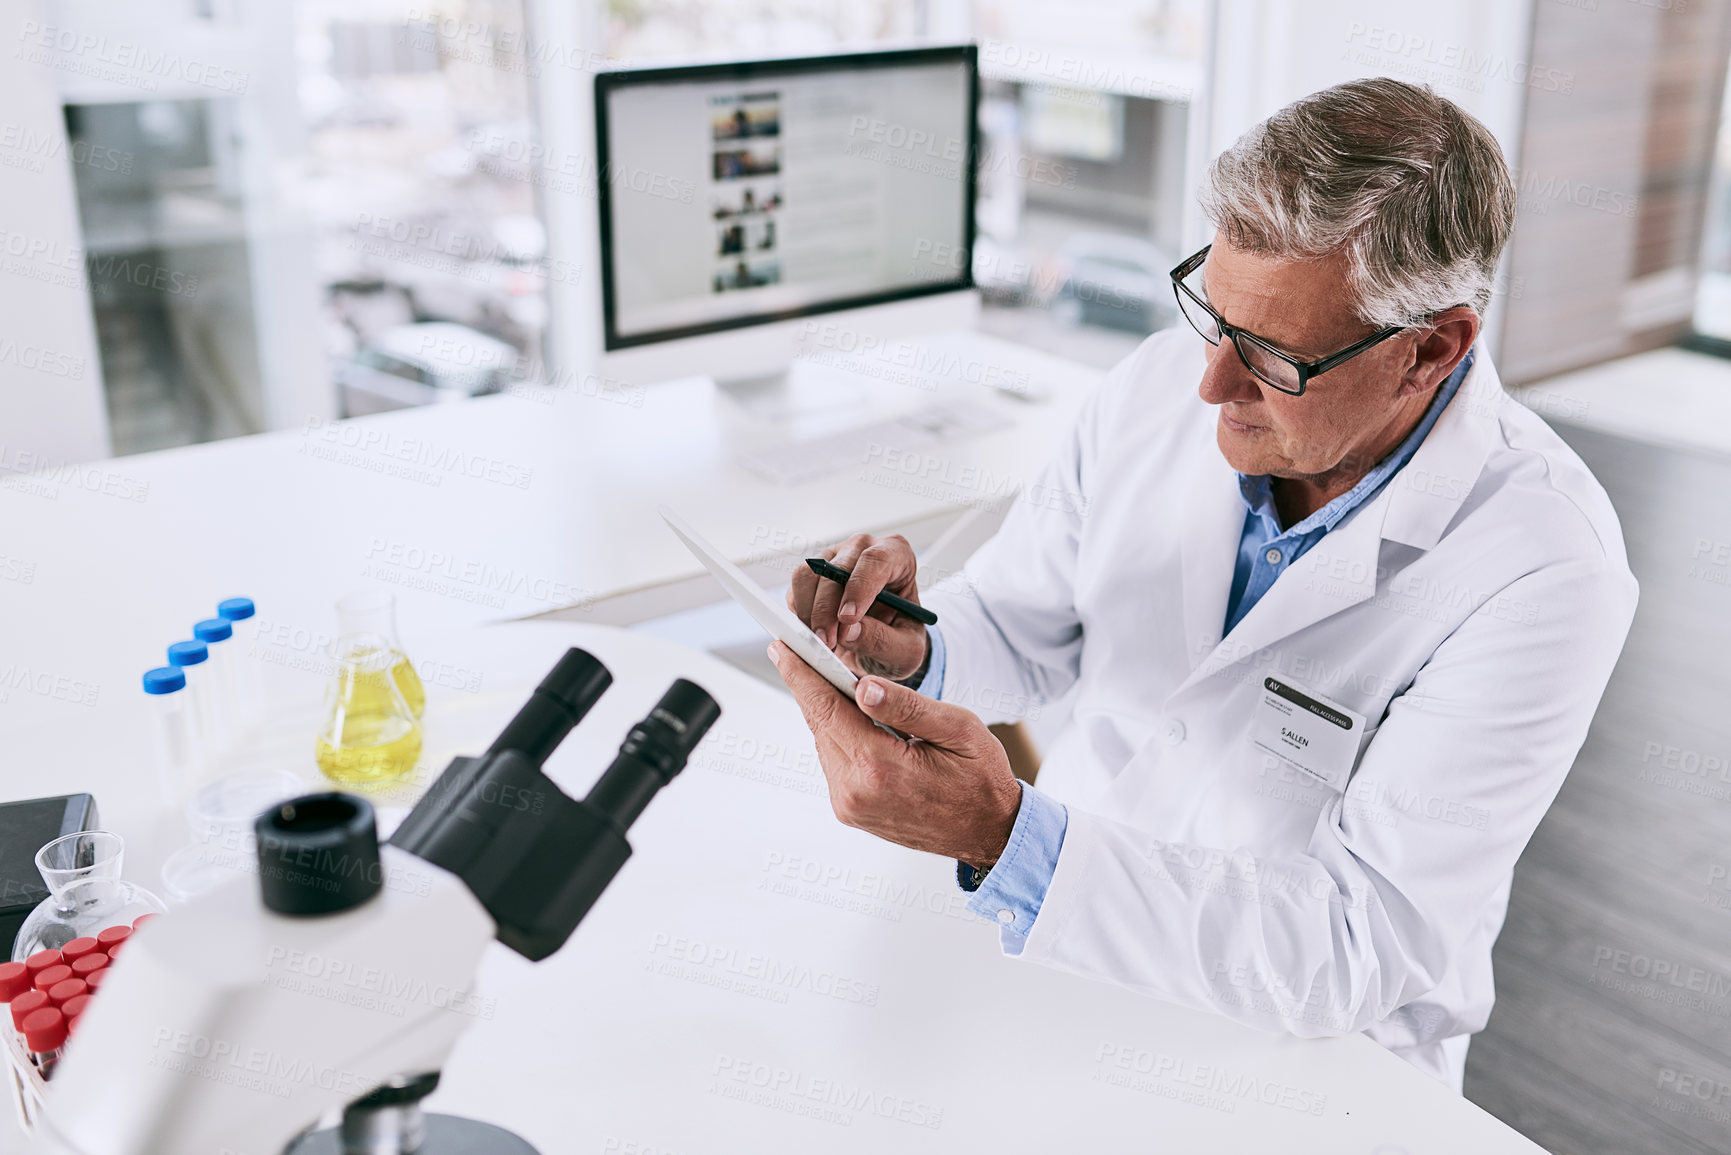 Buy stock photo Shot of a mature scientist working on a digital tablet in a lab